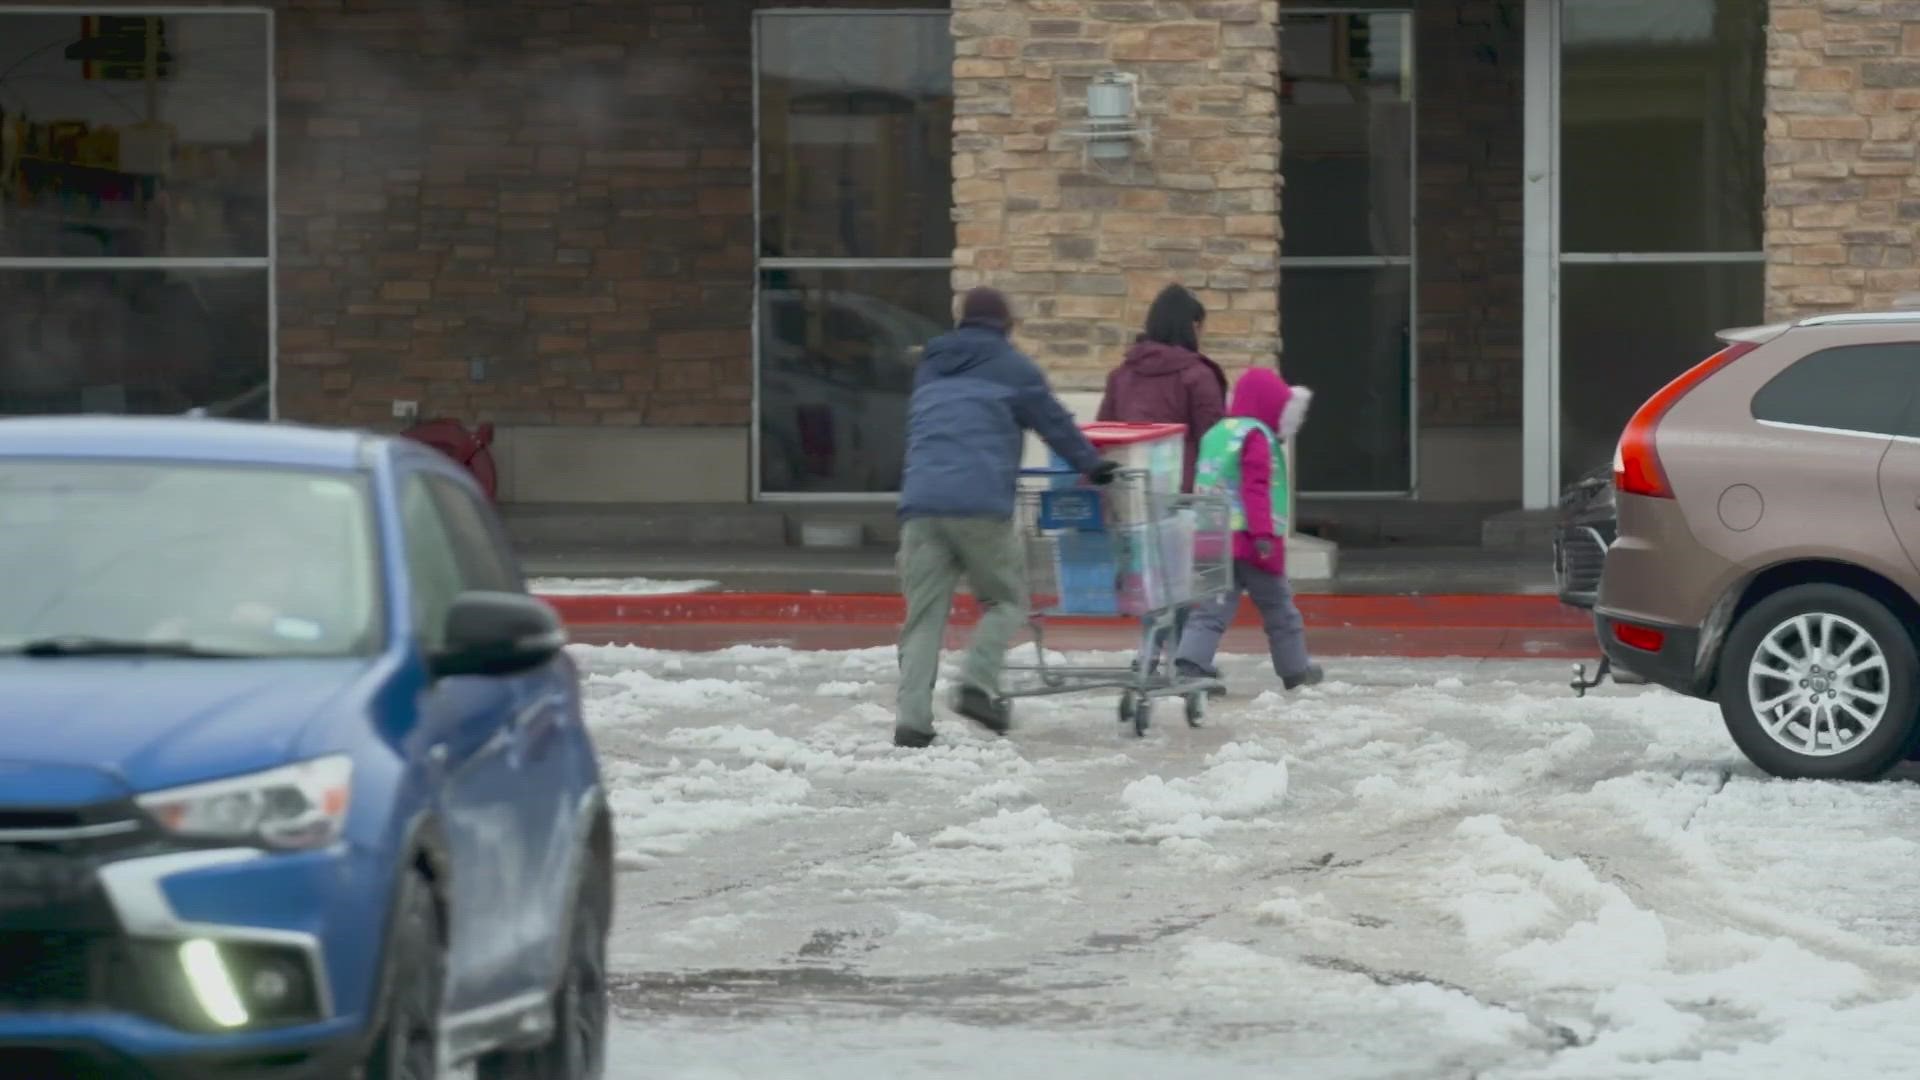 North Texas residents were urged to stay home during the ice storm, but many are braving the conditions to get groceries.